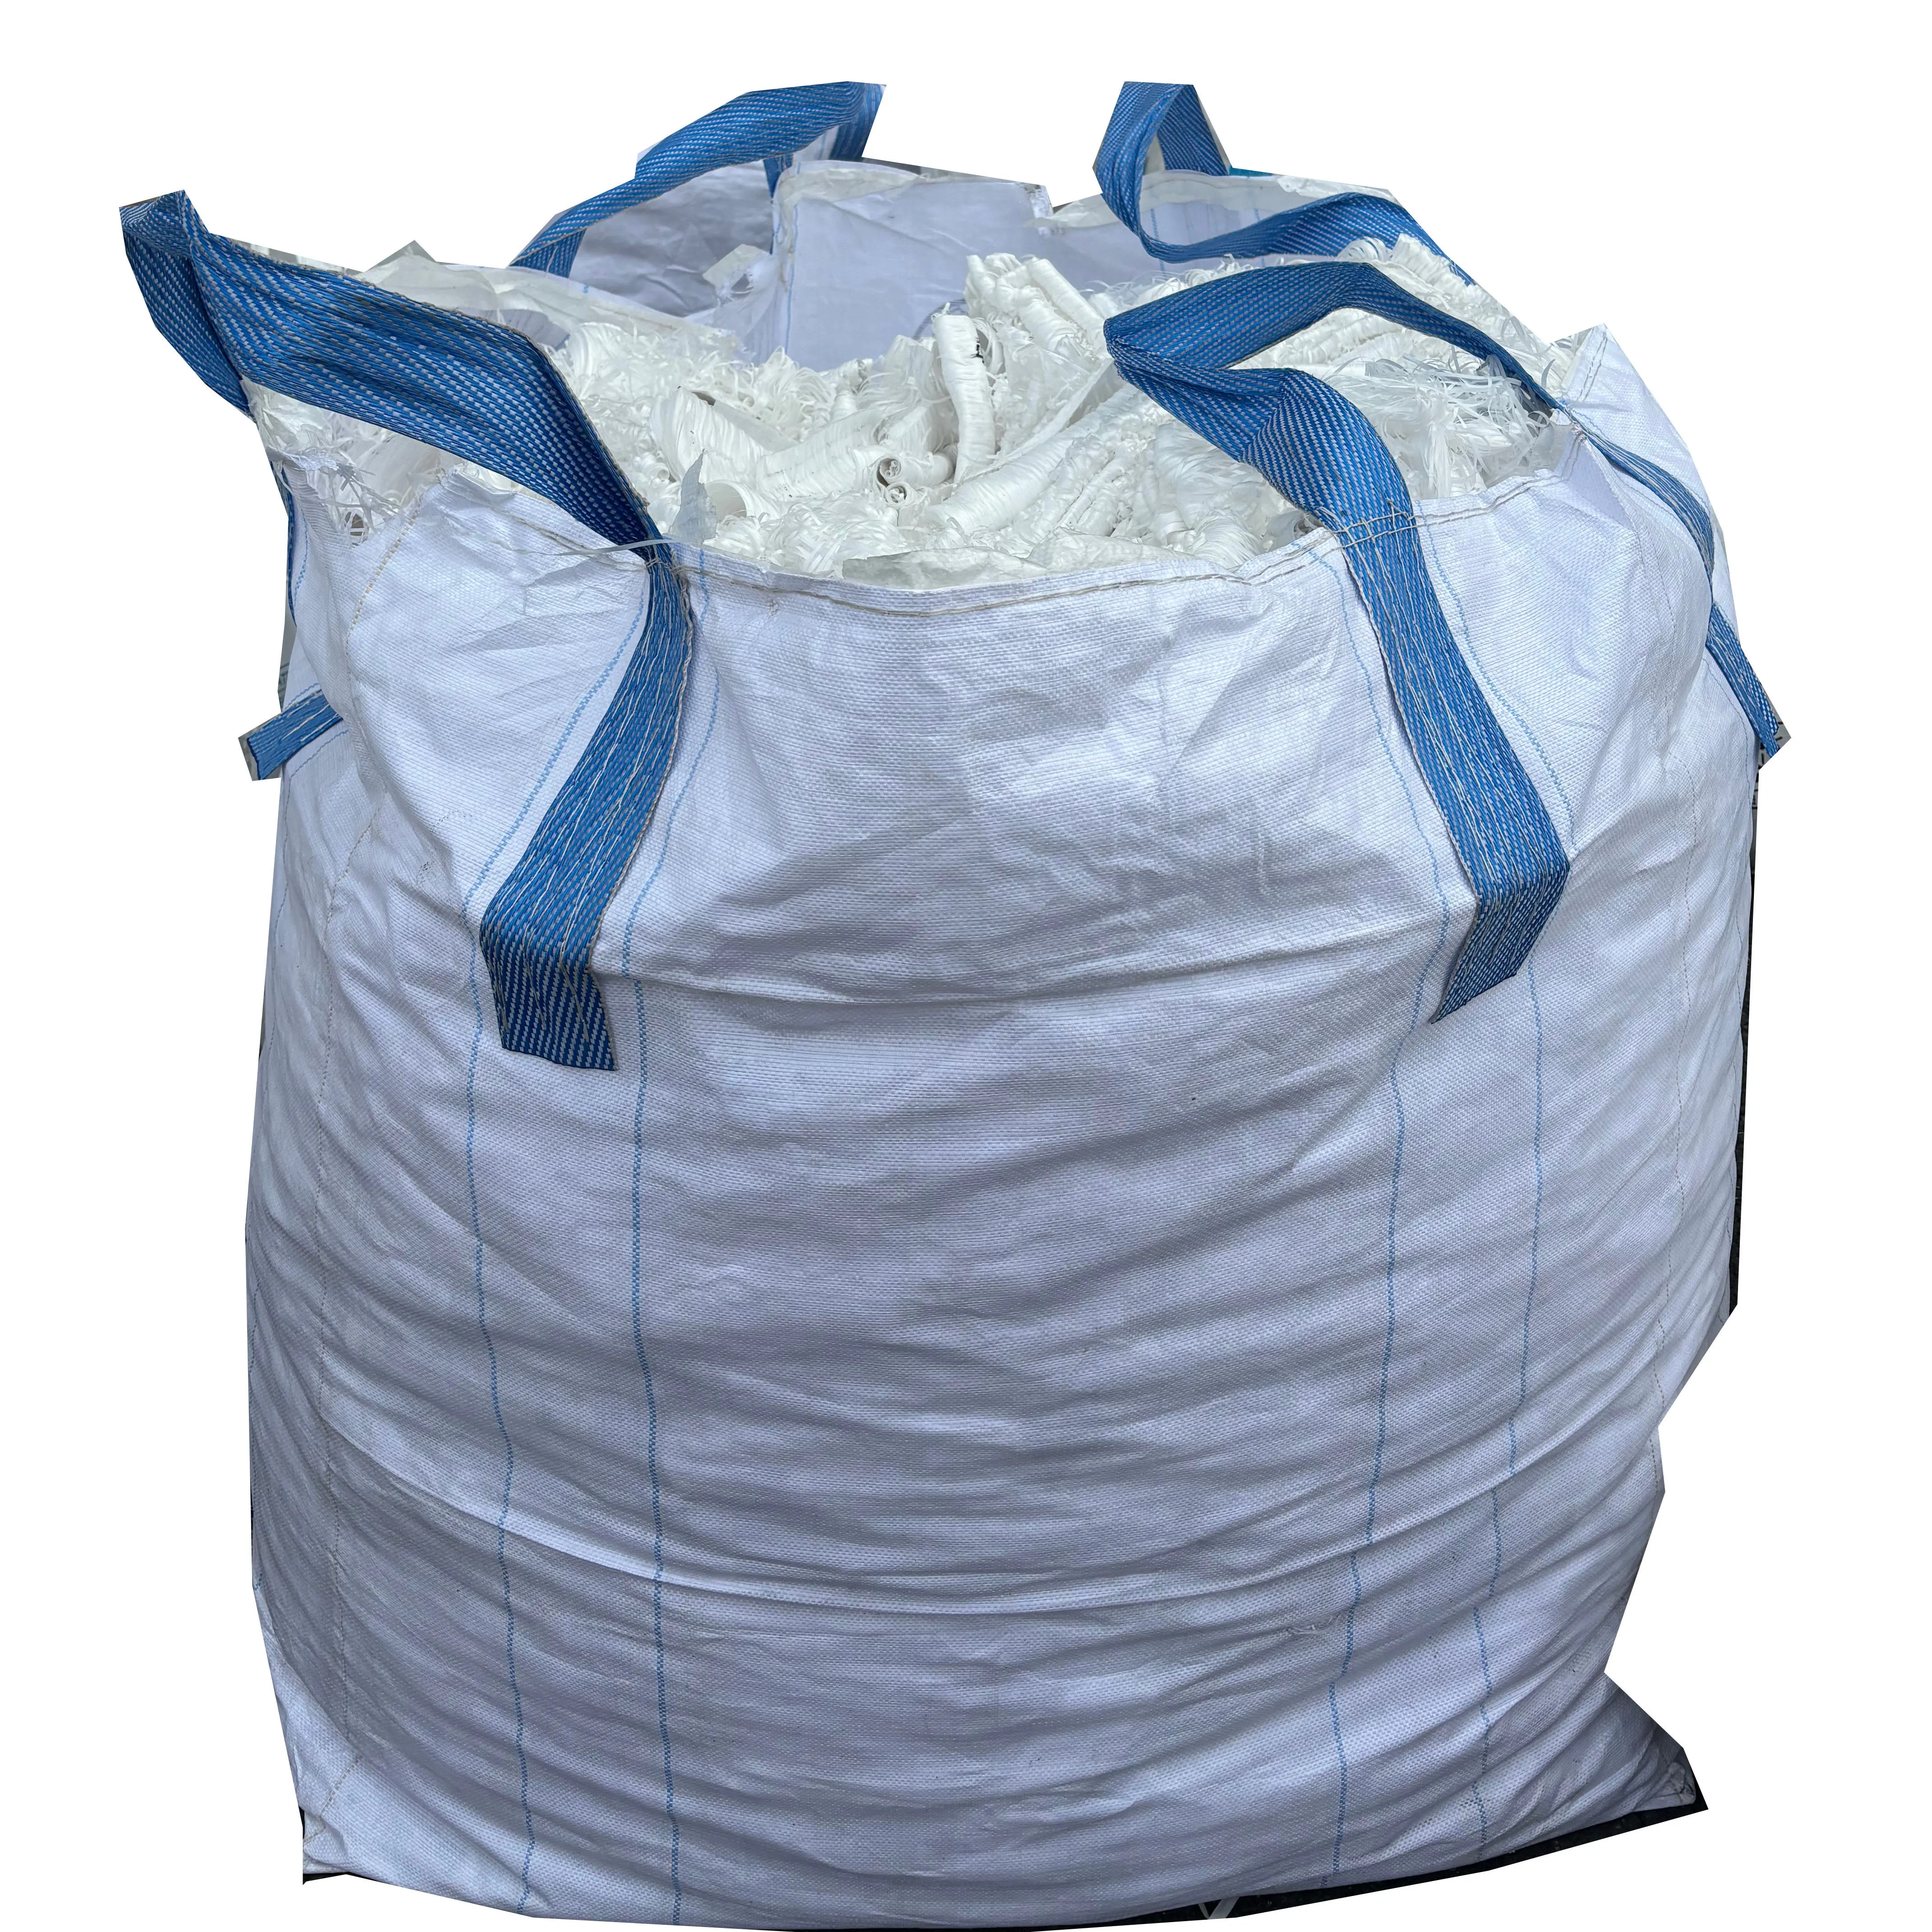 China Manufacturer hot sale 1 ton Super Sacks FIBC Big Bags PP Woven Bags 1000kg Jumbo Bag For Cement Sand With Customized Logo